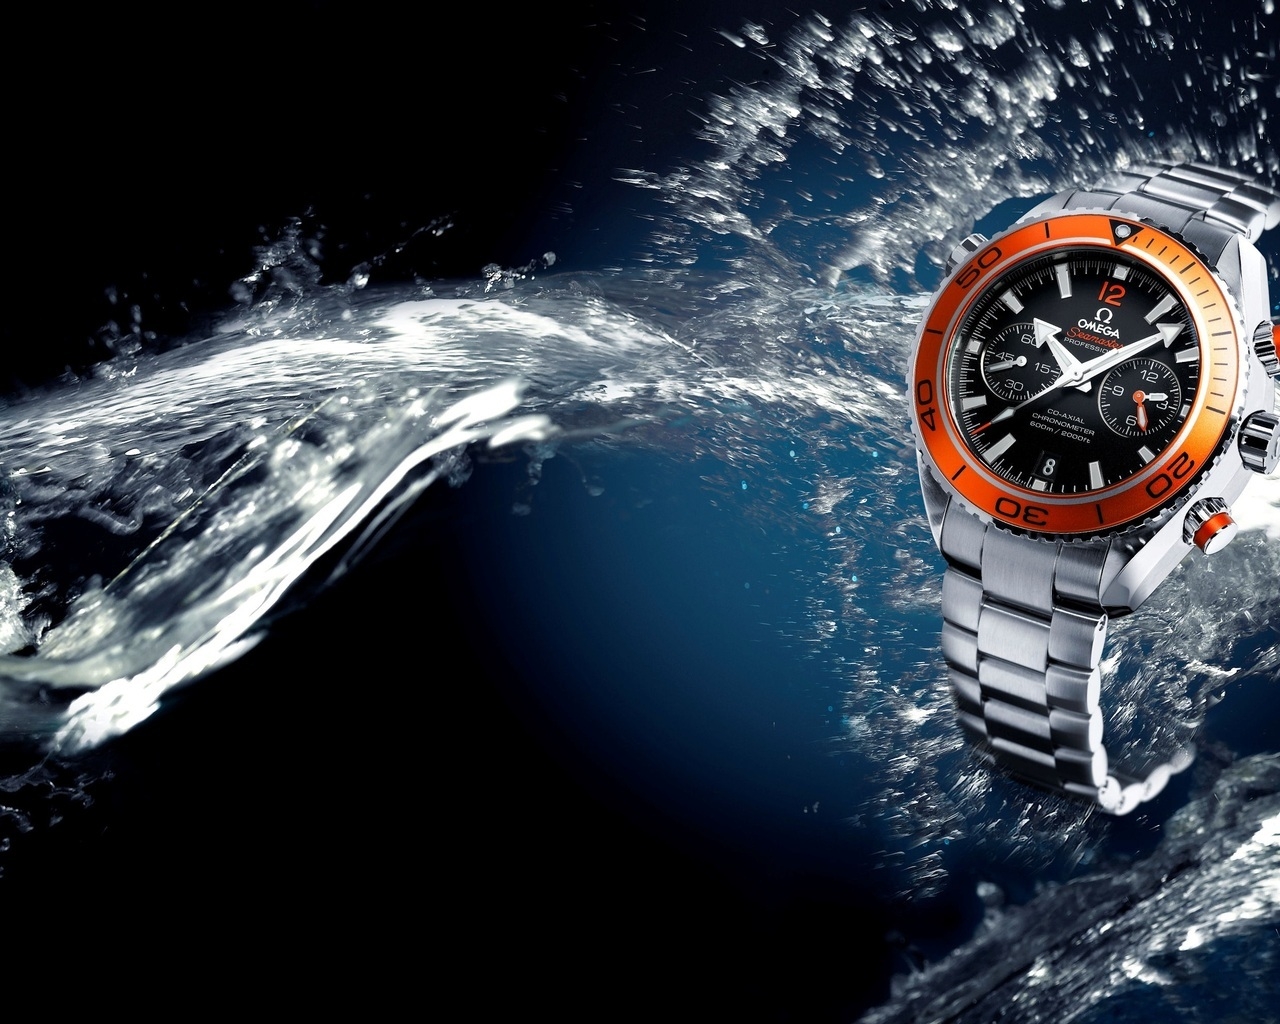 Omega Seamaster Watch for 1280 x 1024 resolution